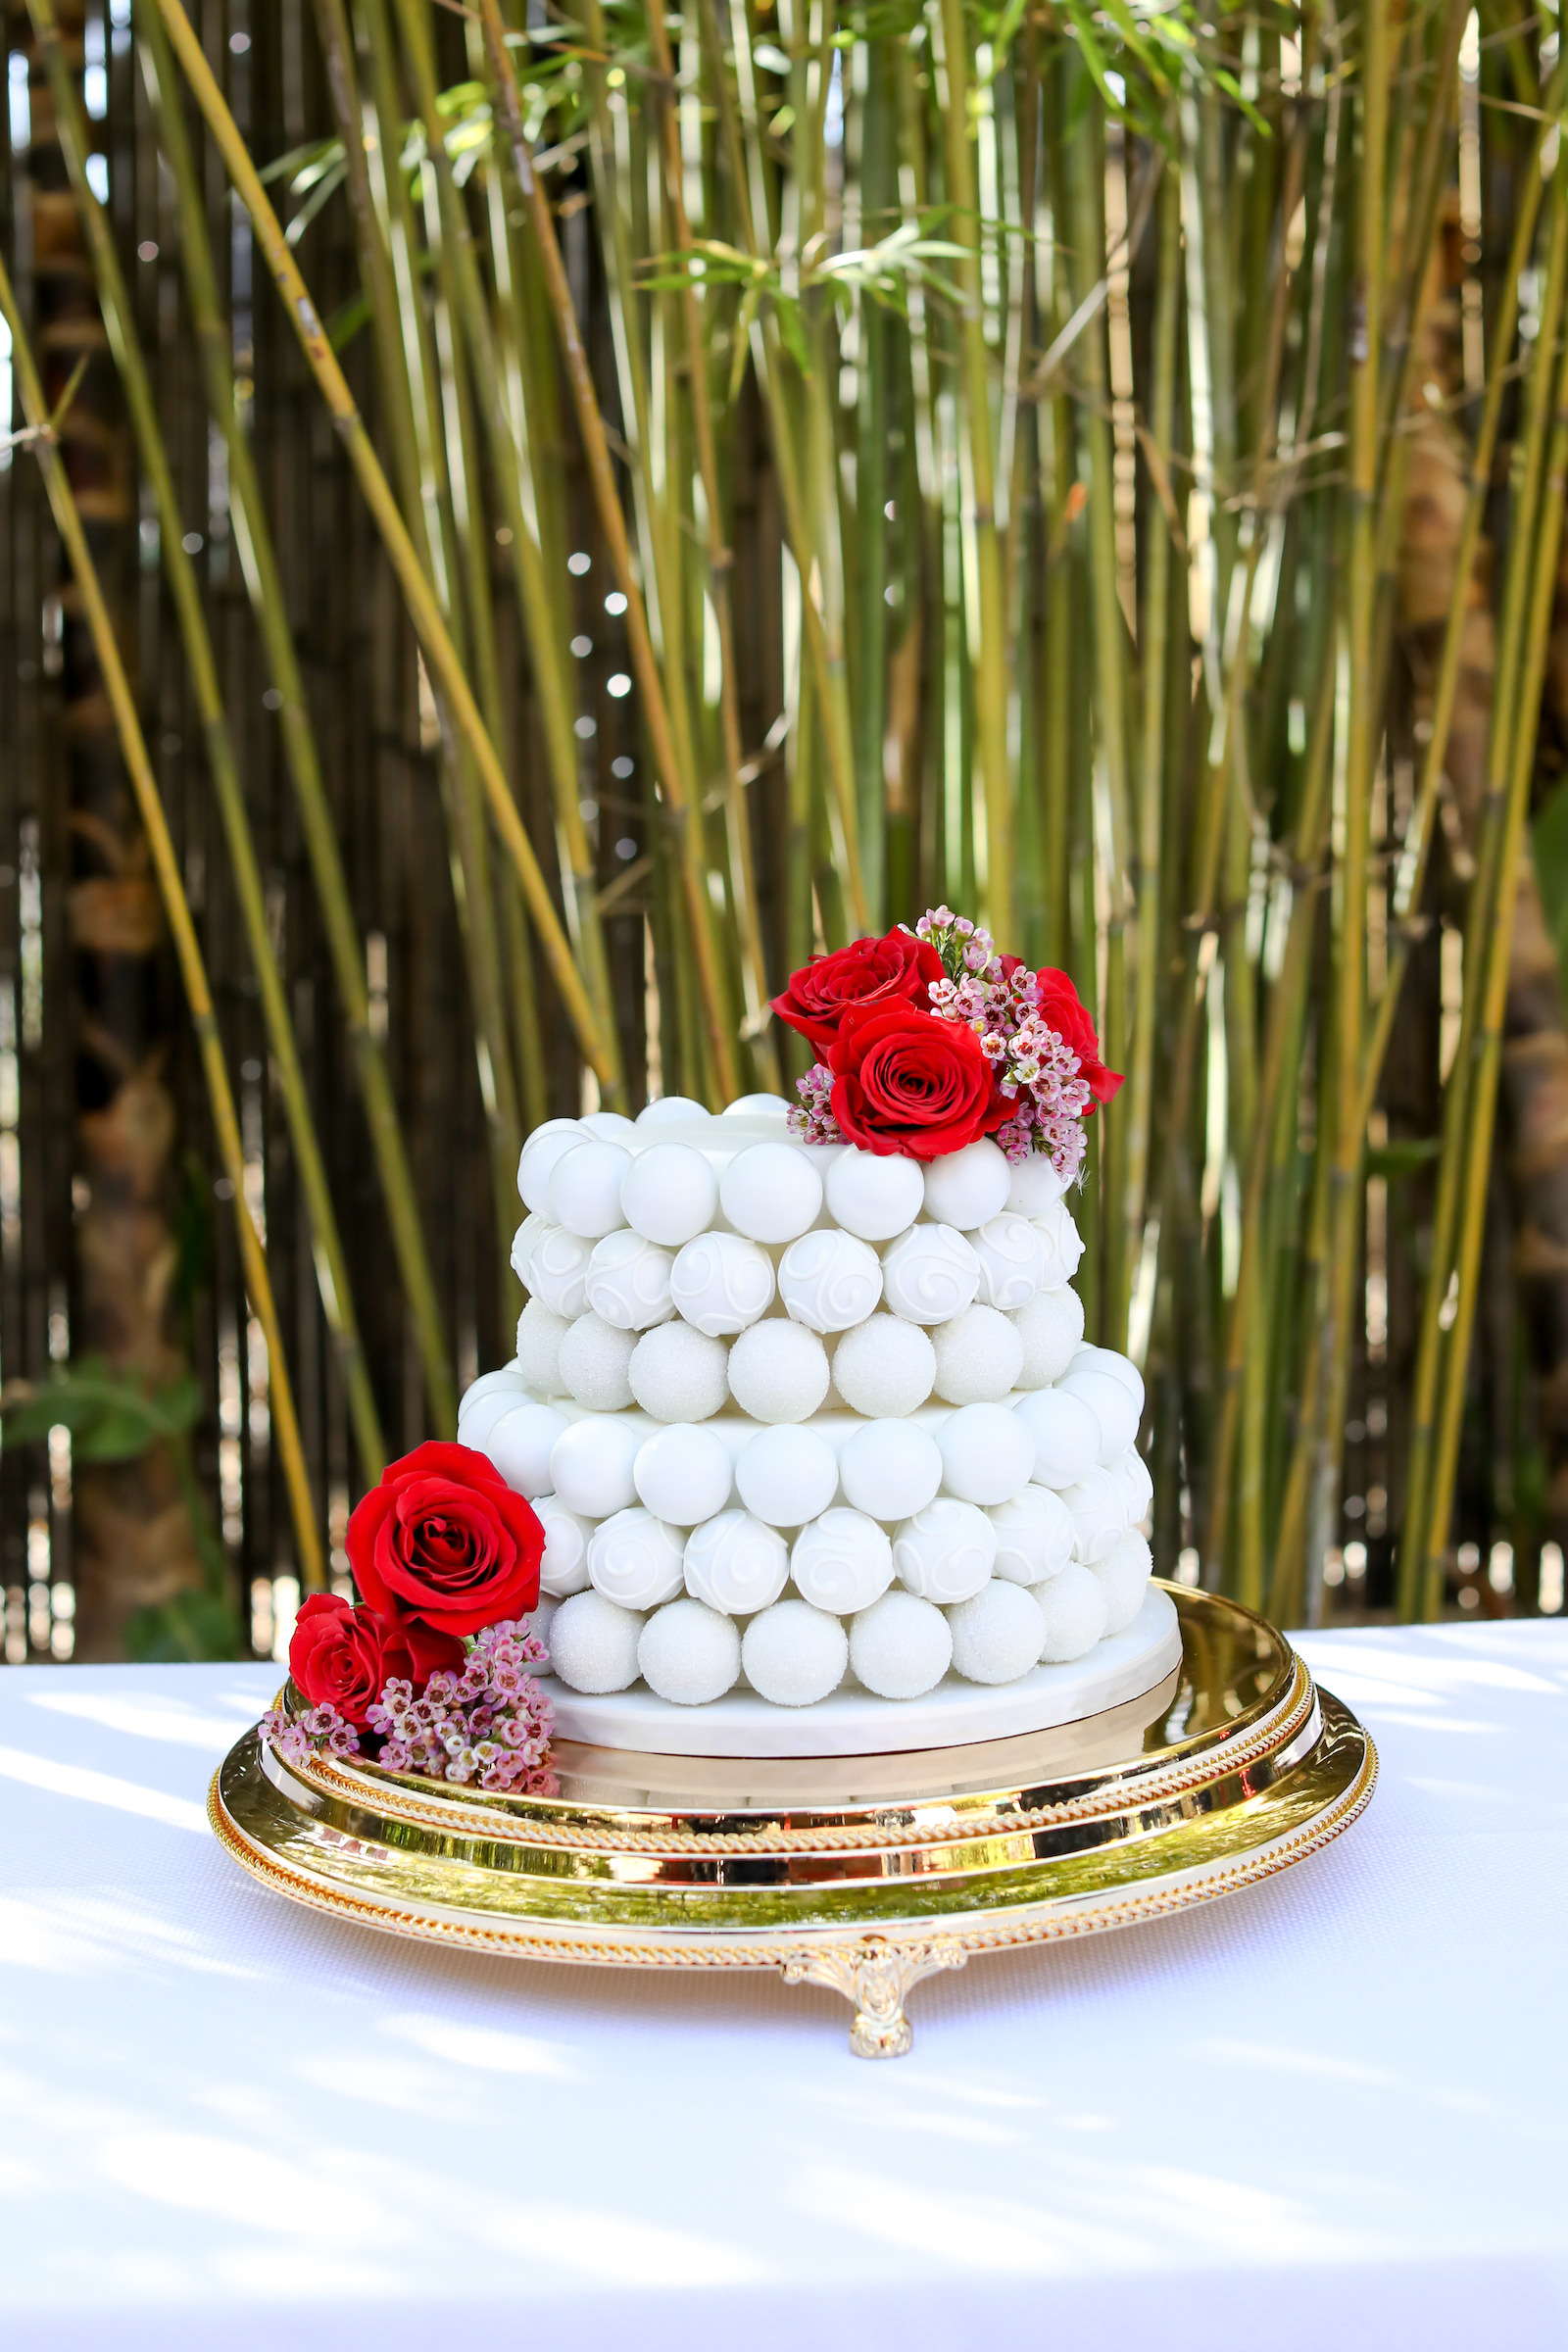 White Two Tier Cake Pop Cake Garnished with Red Roses and Pink Flowers | Tampa Bay Cake Company